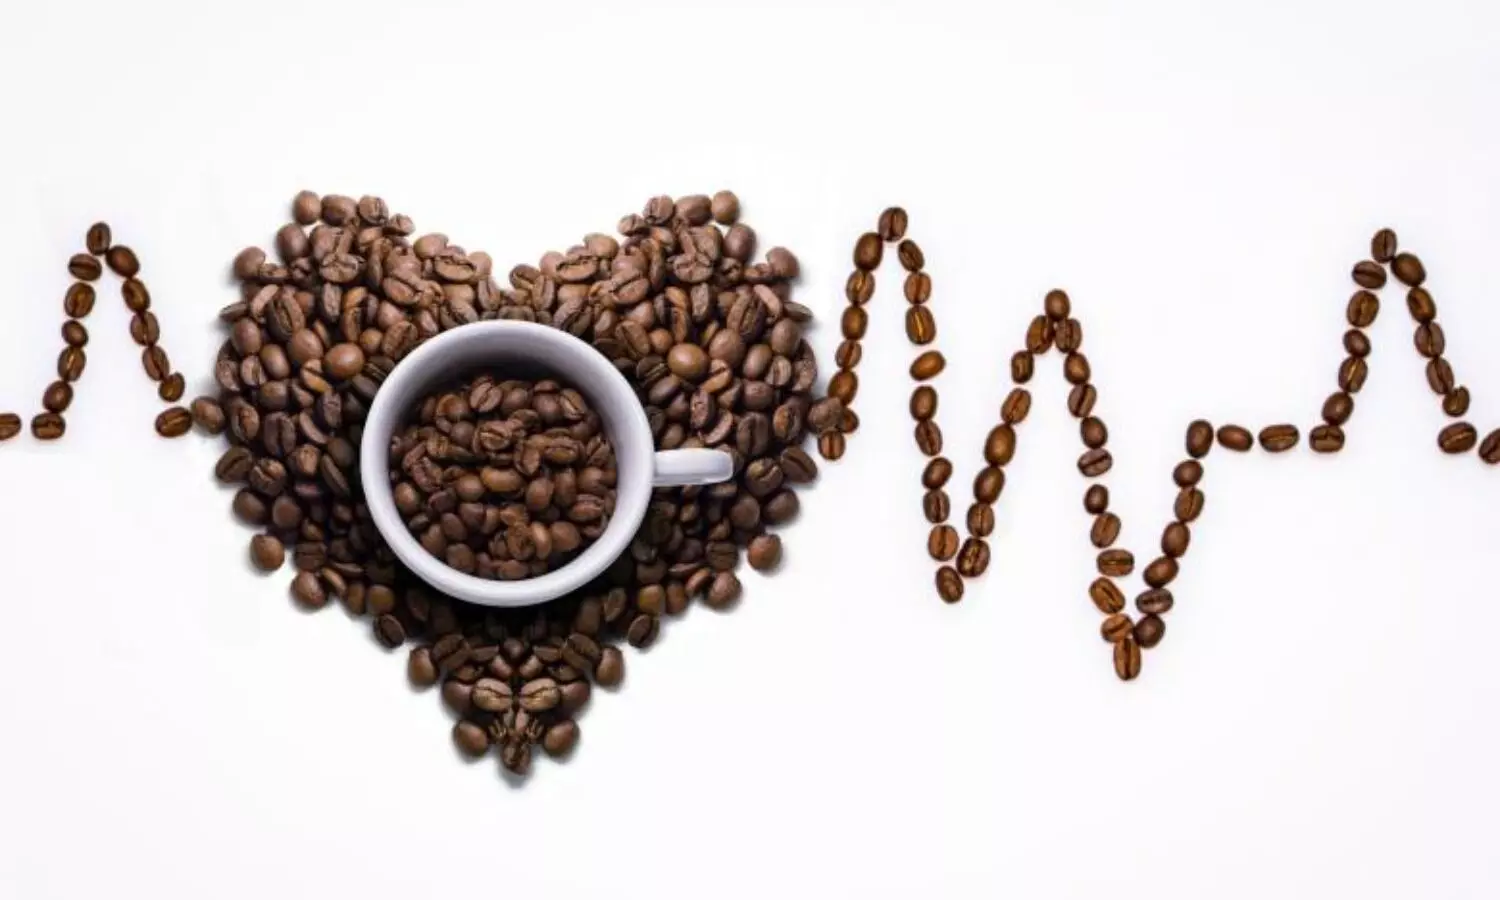 Habitual drinking of coffee may reduce risk of arrhythmia: Study